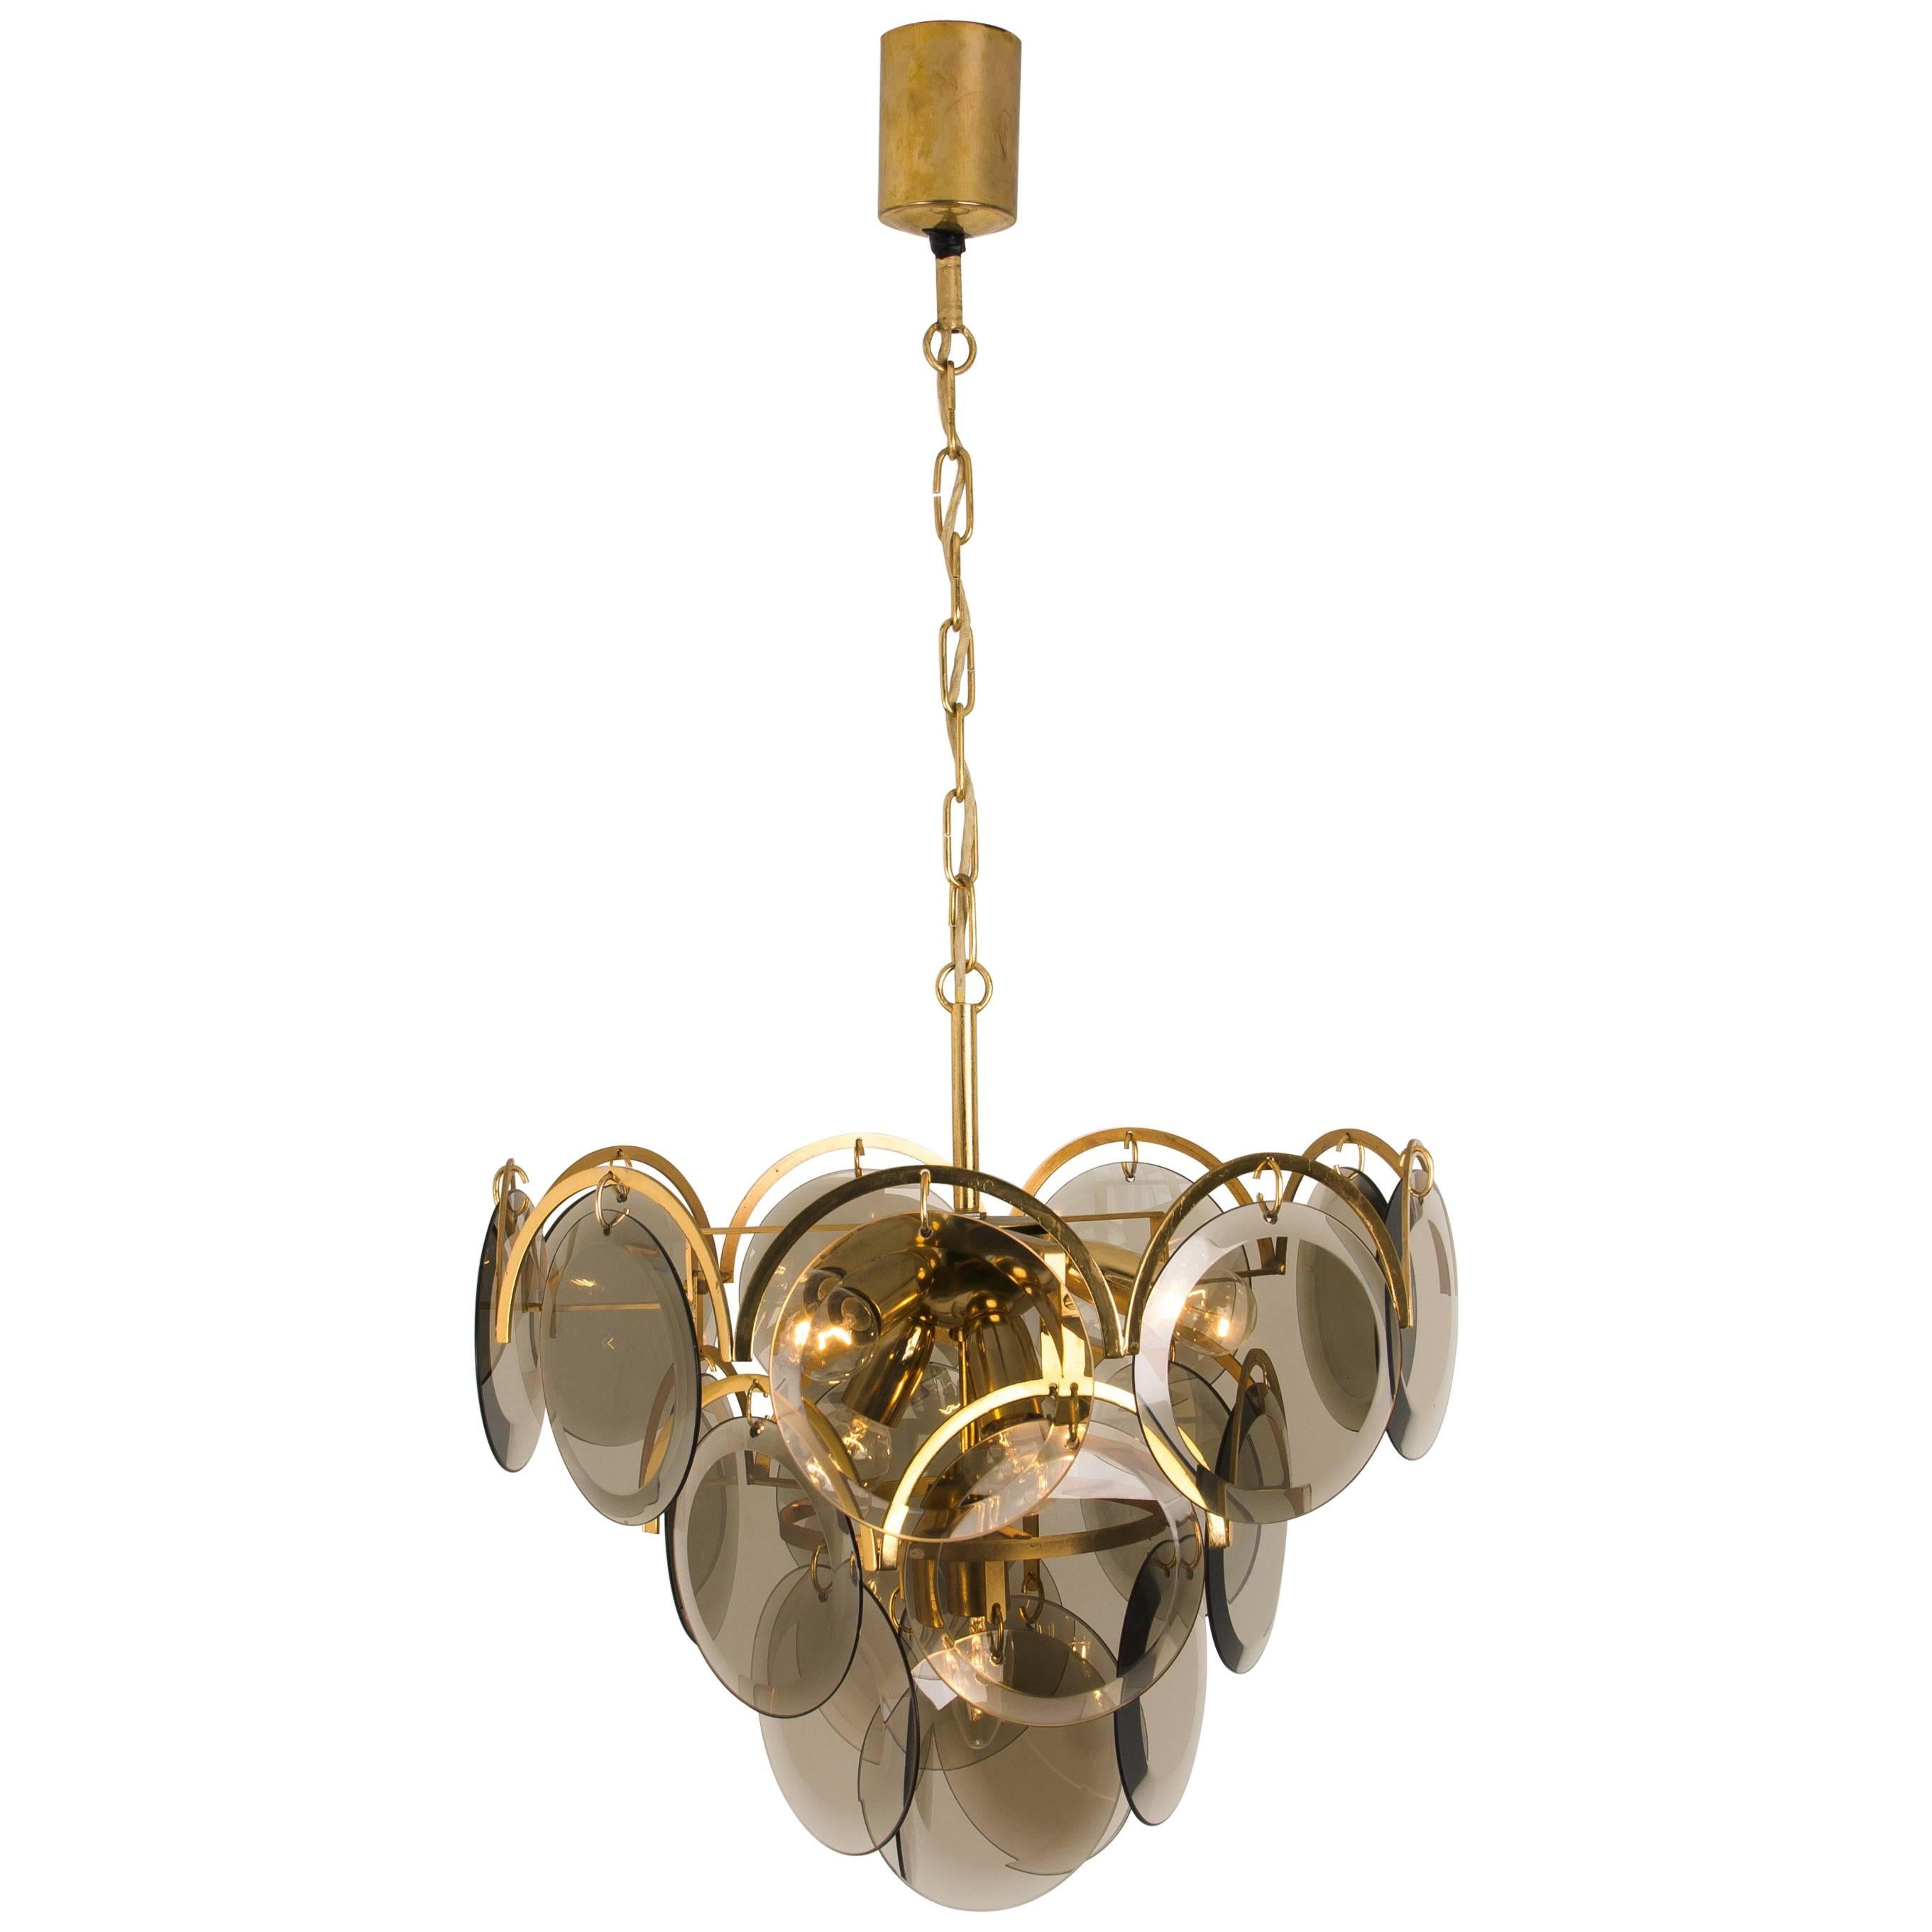 Mid-Century Modern Smoked Glass and Brass Chandelier Attributed to Vistosi, Italy, 1970s